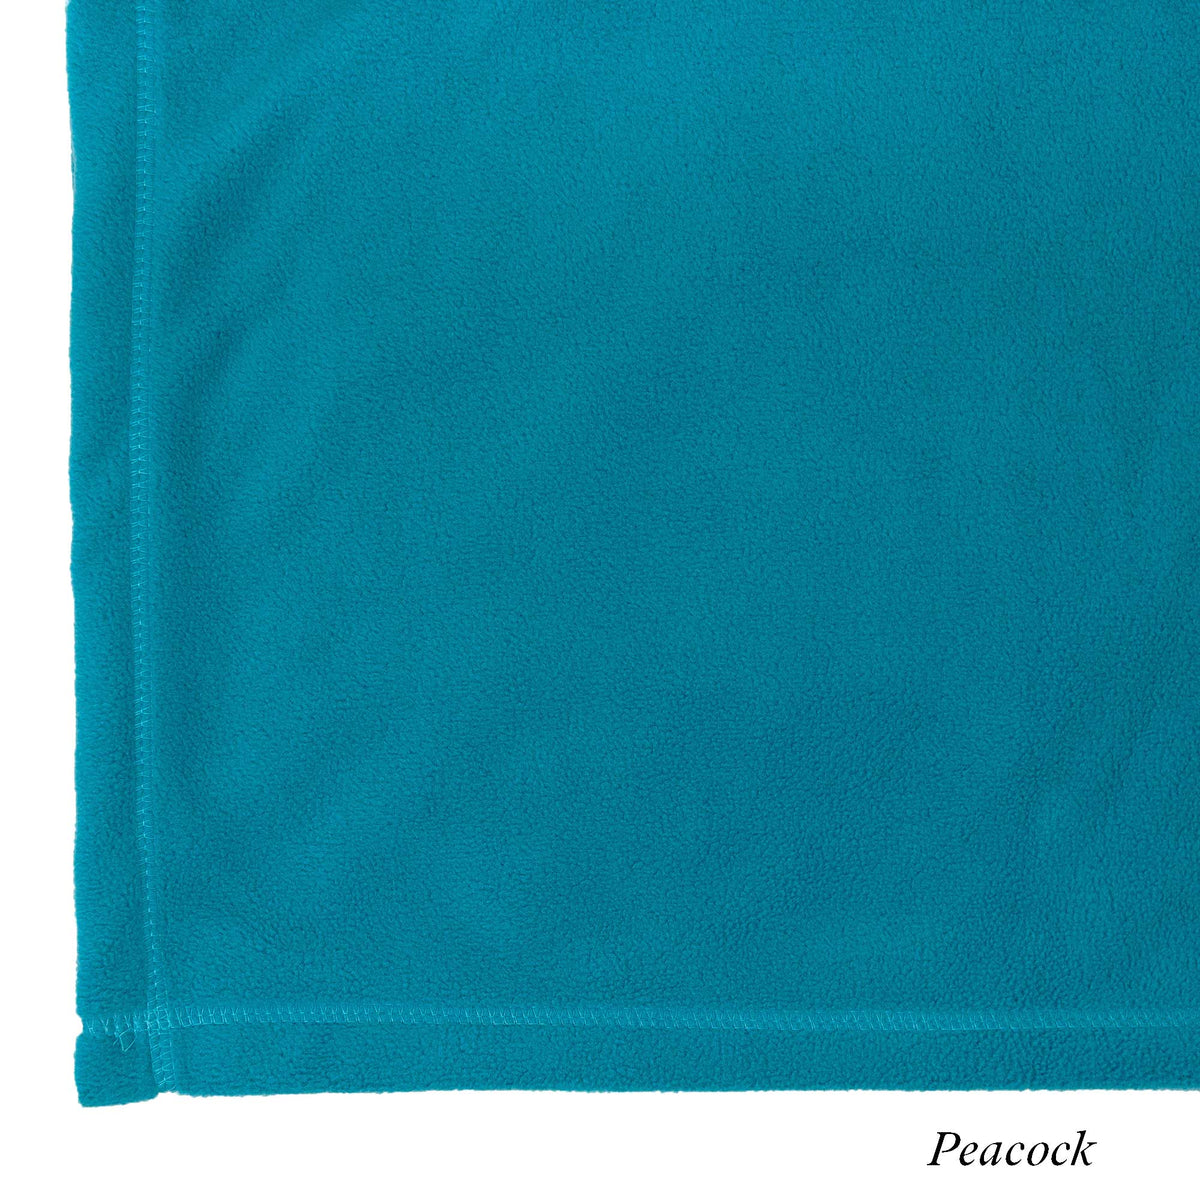 Peacock - Peaceful Touch - The Best Fleece Blankets - Custom Size Peaceful Touch Fleece Blankets - American Blanket Company